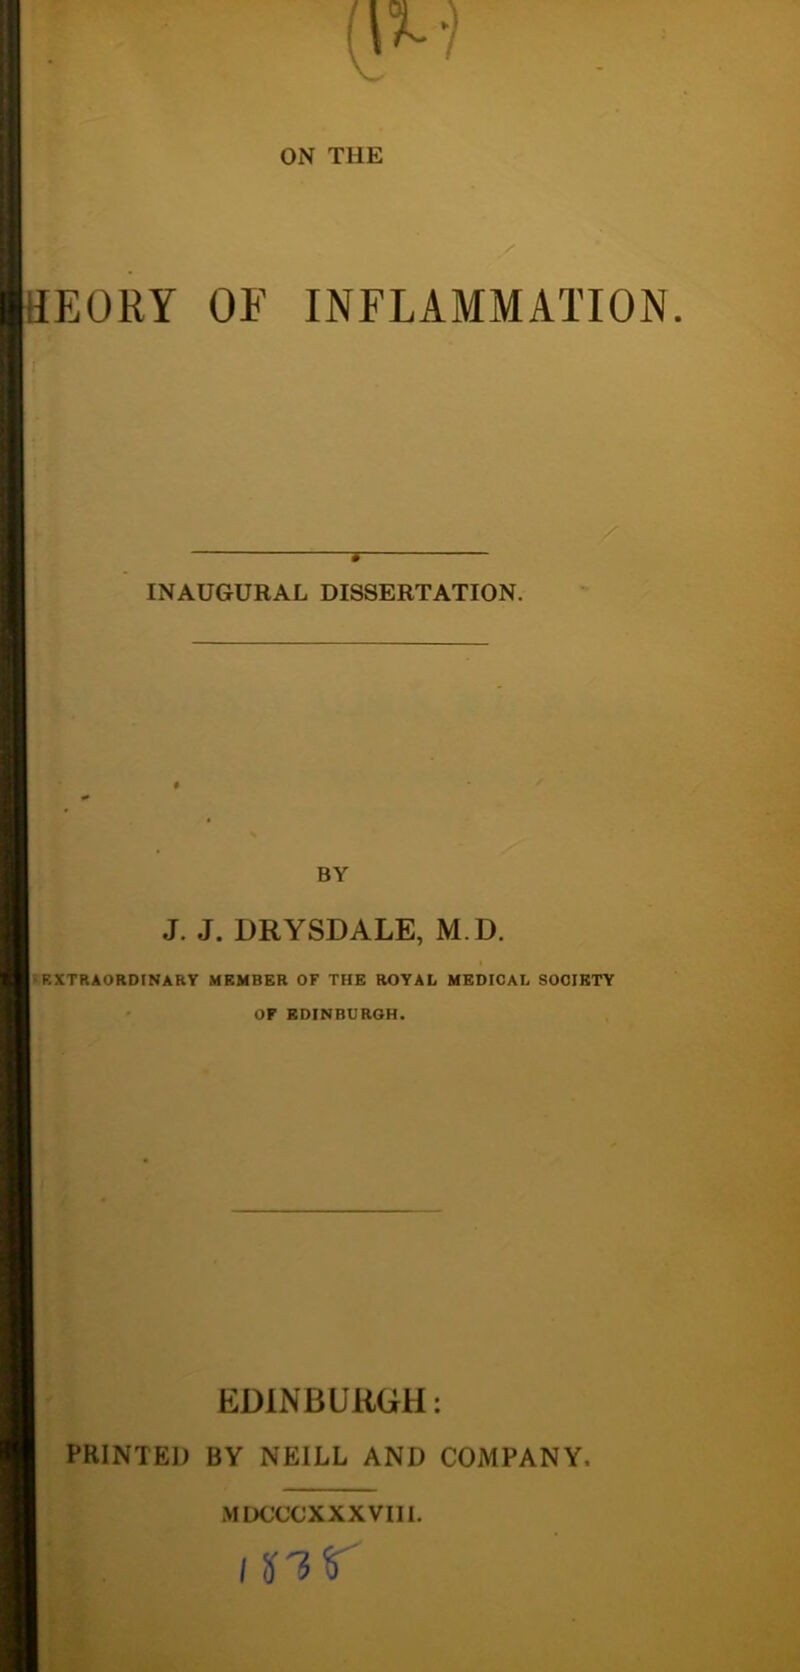 ON THE y HEORY OF INFLAMMATION. » INAUGURAL DISSERTATION. BY J. J. DRYSDALE, M.D. •EXTRAORDINARY MEMBER OF THE ROYAL MEDICAL SOCIETY ' OF EDINBURGH. EDINBURGH: PRINTED BY NEILL AND COMPANY. MDCCCXXXVIH. I nr